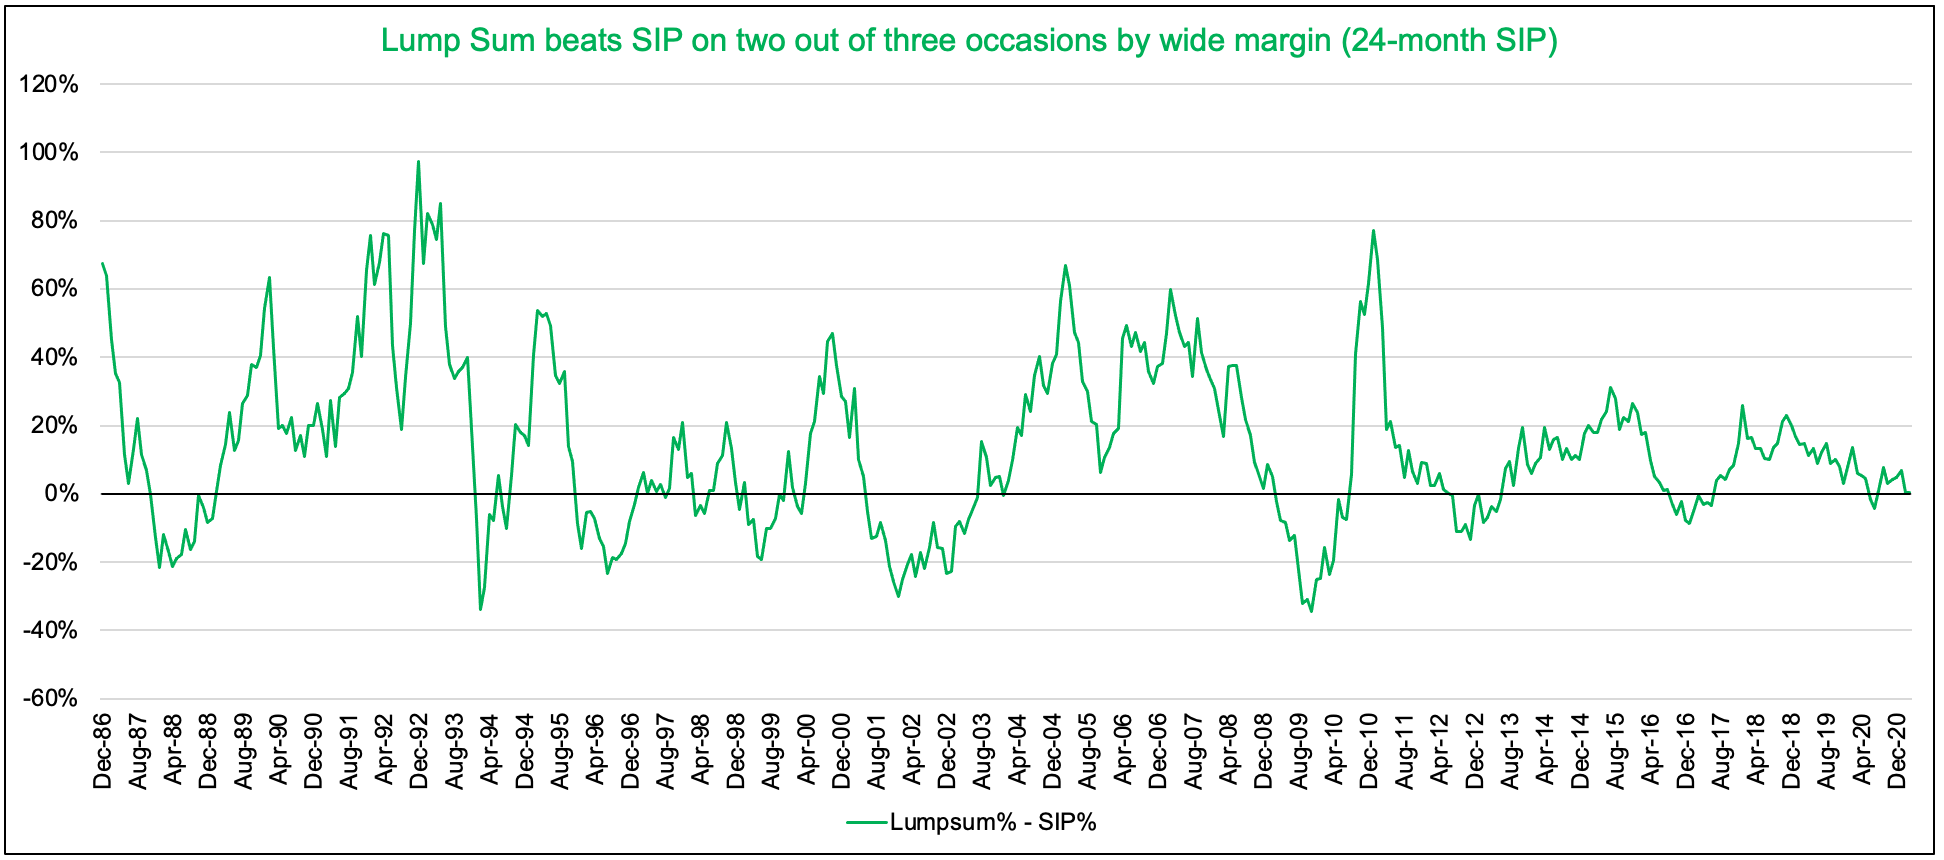 lumpsum beats sip on two out of three occasions y wide margin (24-month sip)